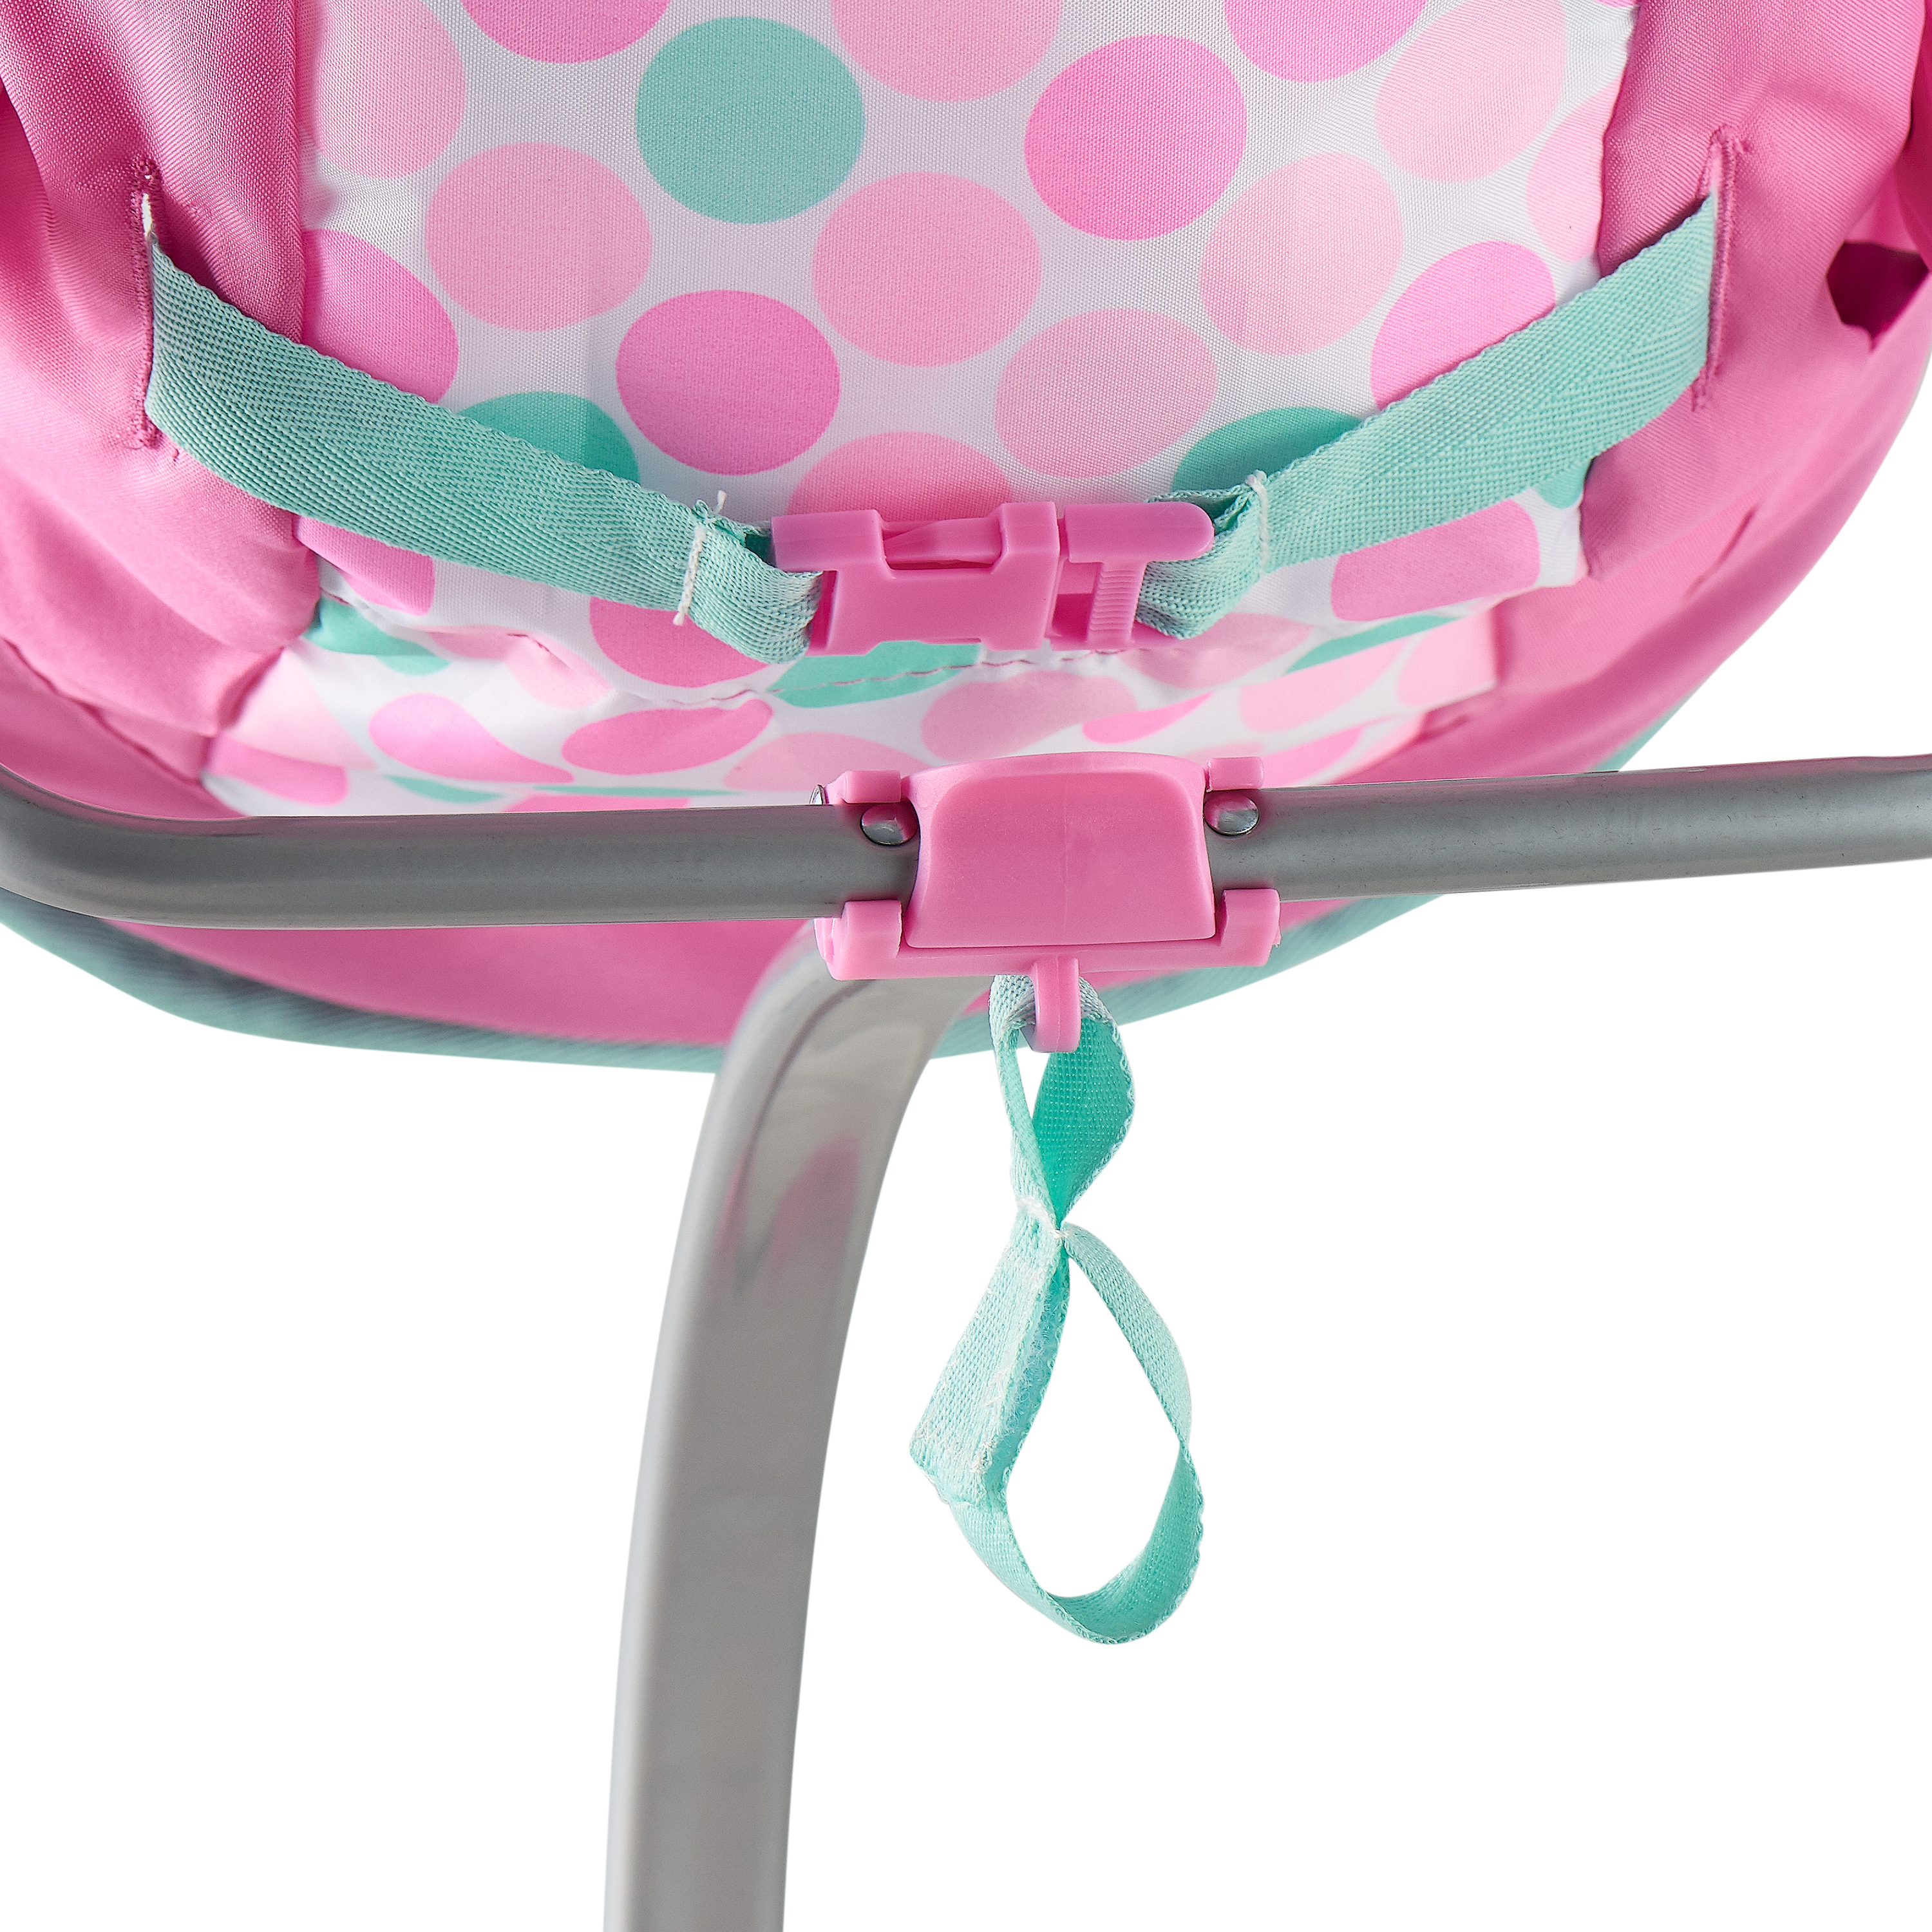 My Sweet Love 3-in-1 High Chair for 18" Dolls - image 3 of 10